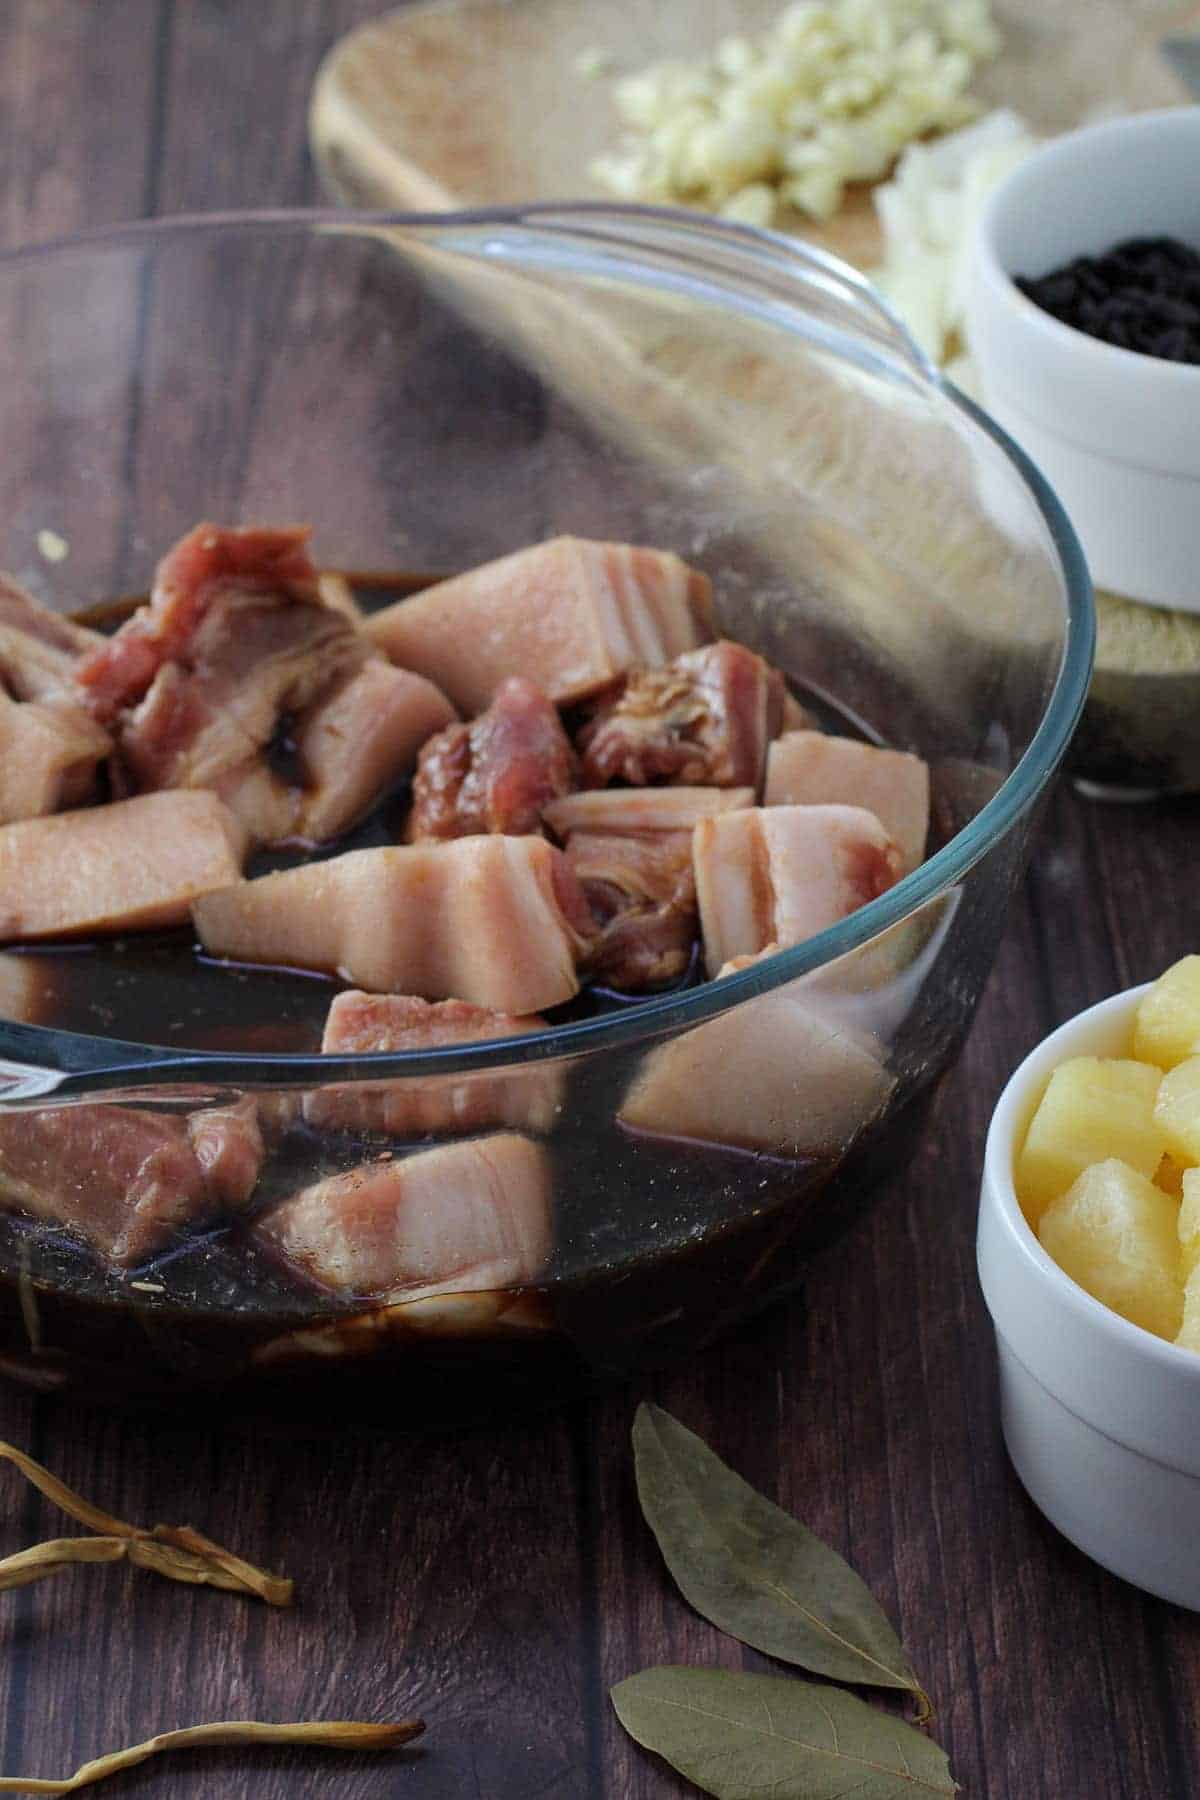 marinating pork belly in soy sauce mixture in a clear glass bowl